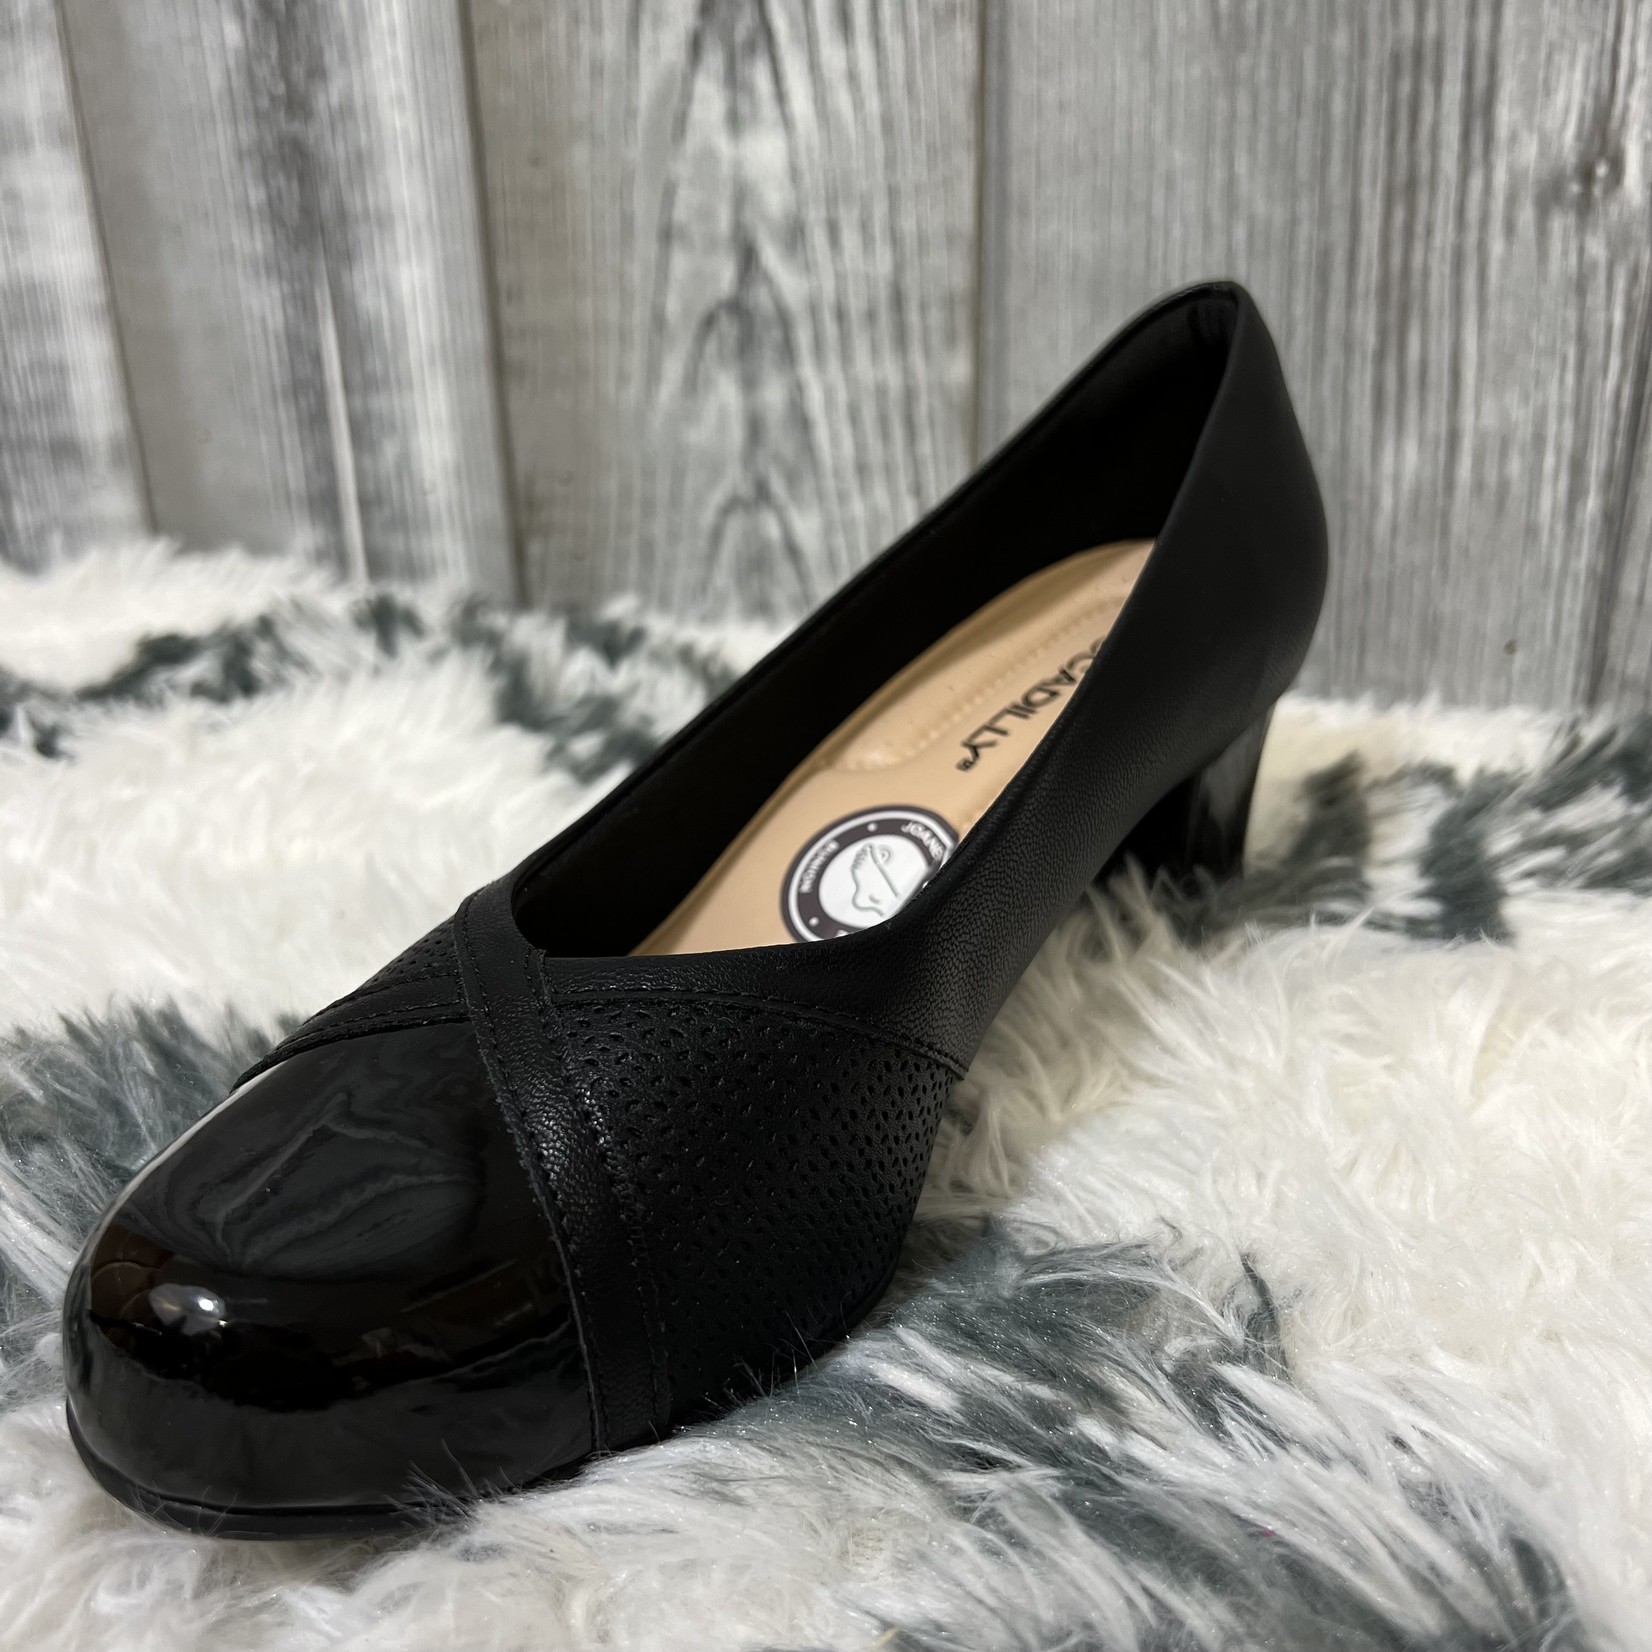 Piccadilly Black 110137-8 Bunion Friendly Square Heel